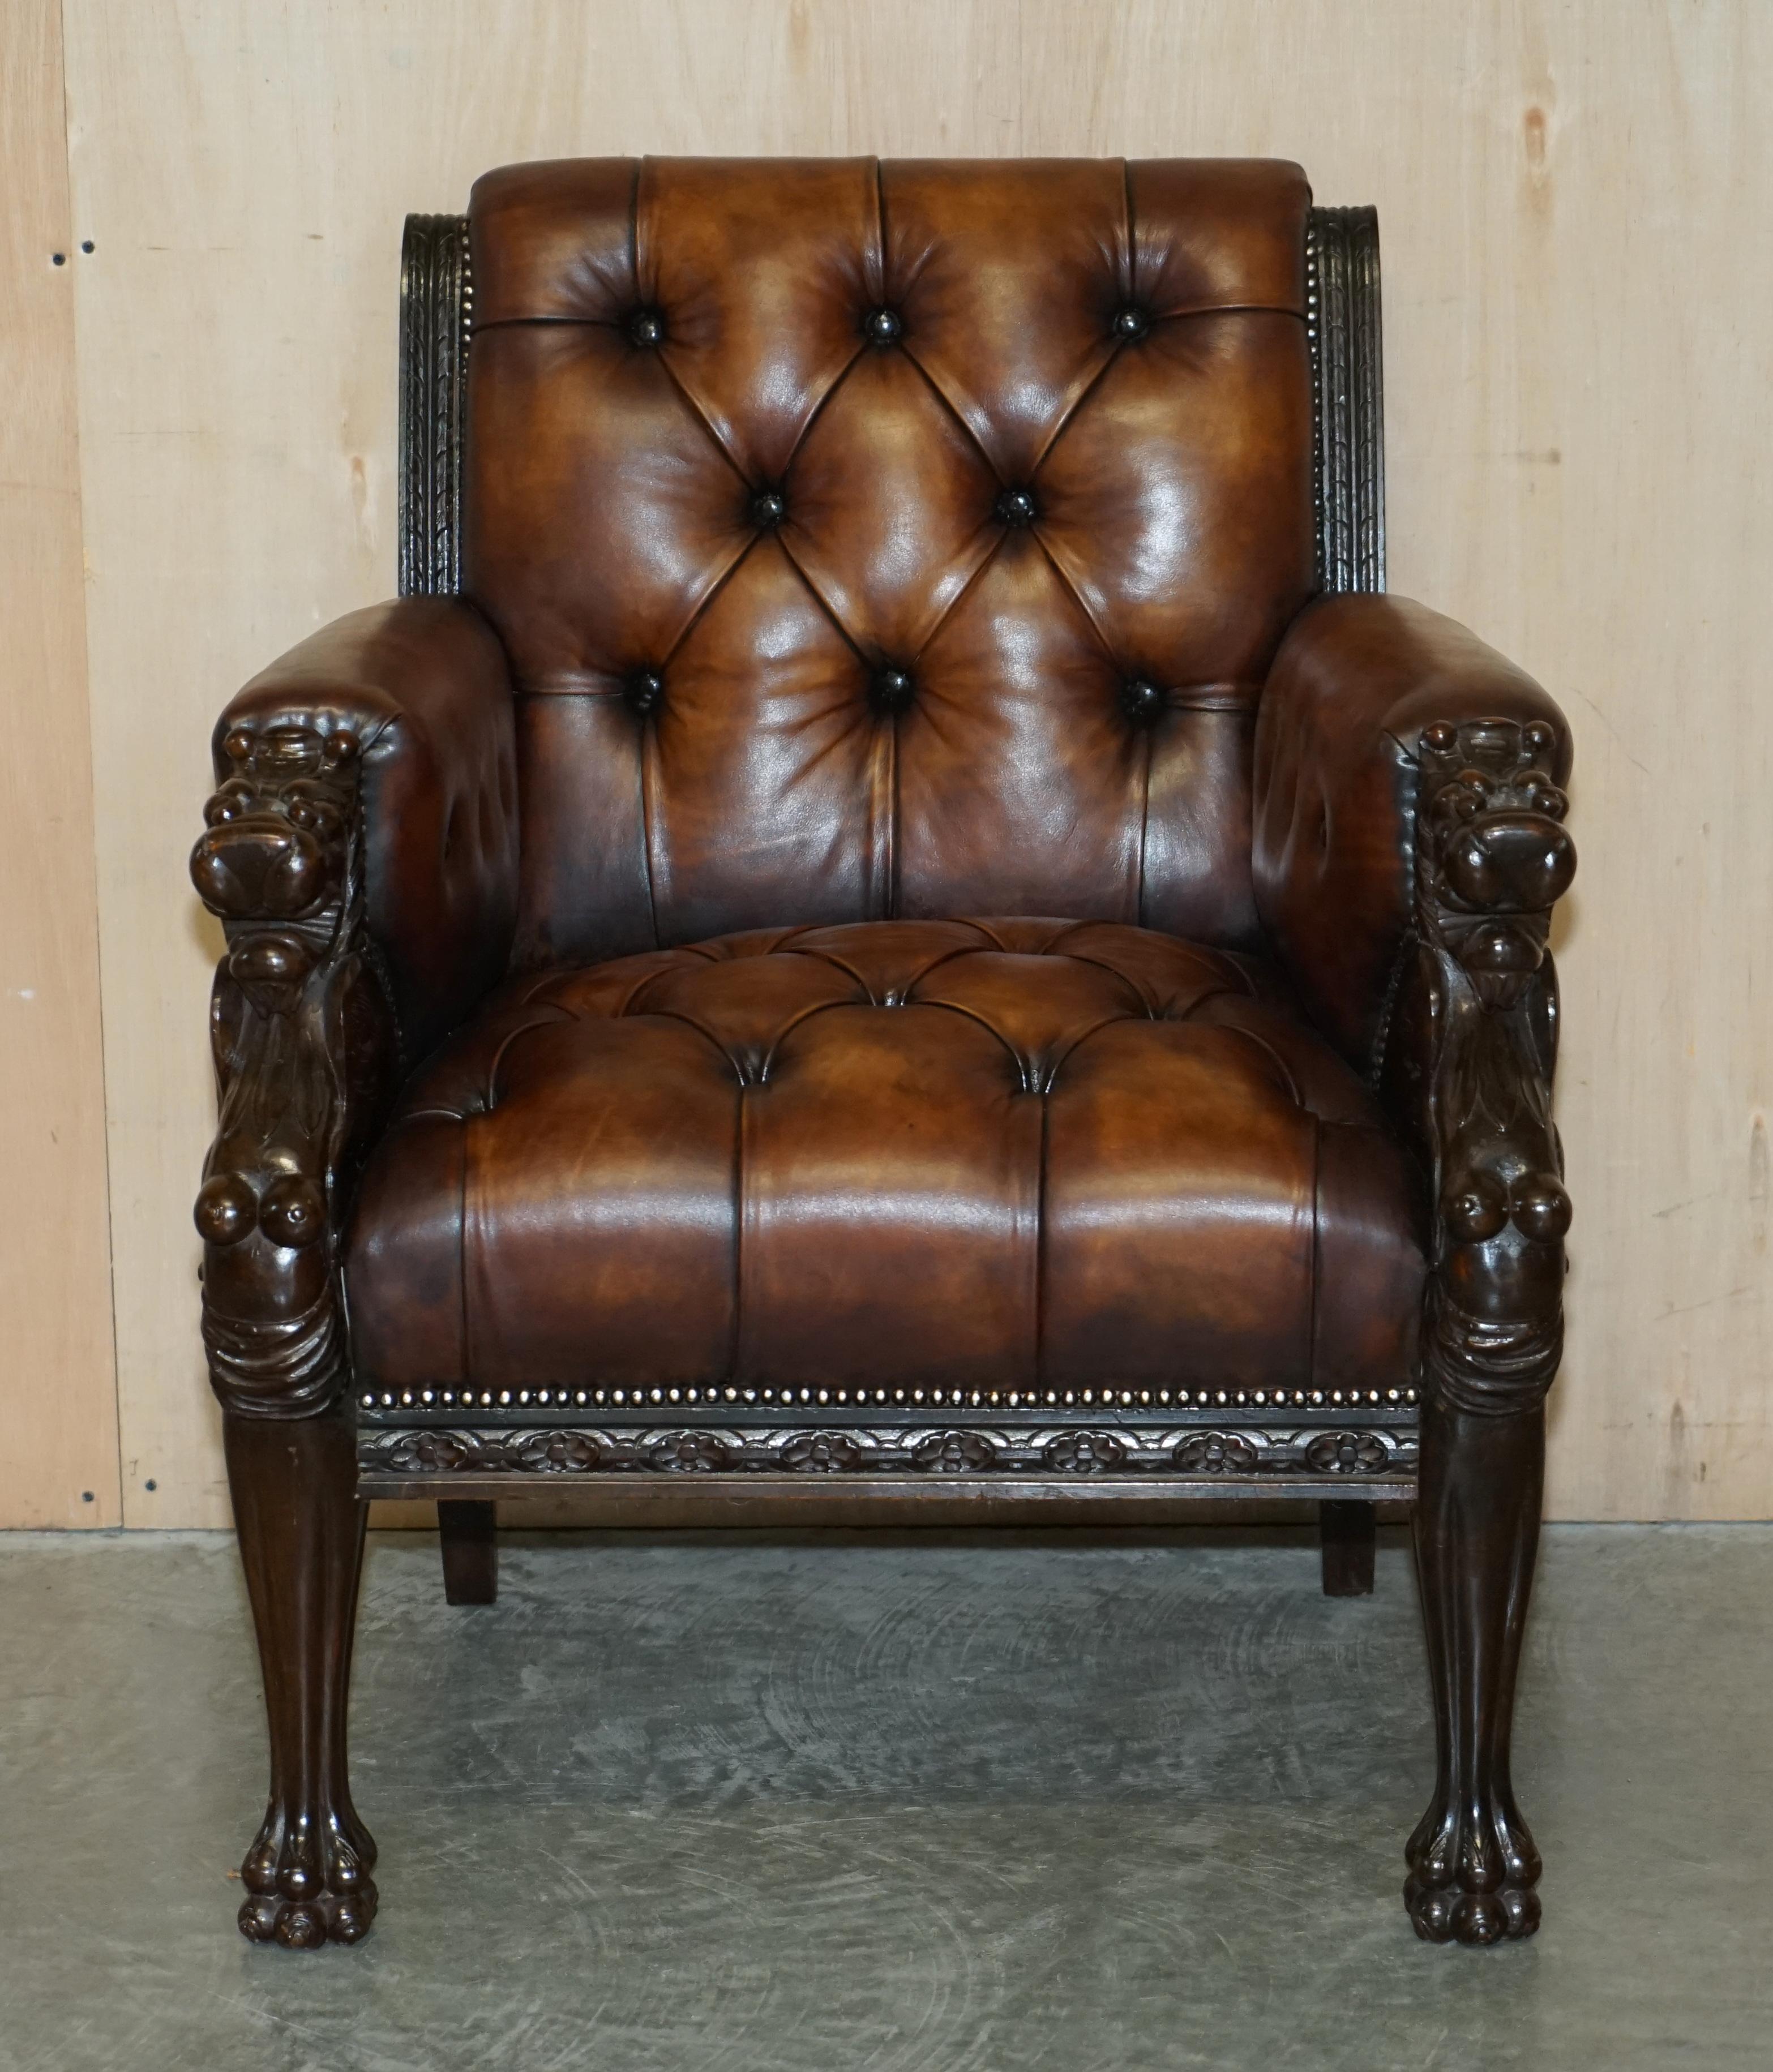 RESTORED ANTIQUE LiON HAND CARVED BROWN LEATHER CHESTERFIELD SOFA ARMCHAIR SUITE im Angebot 8